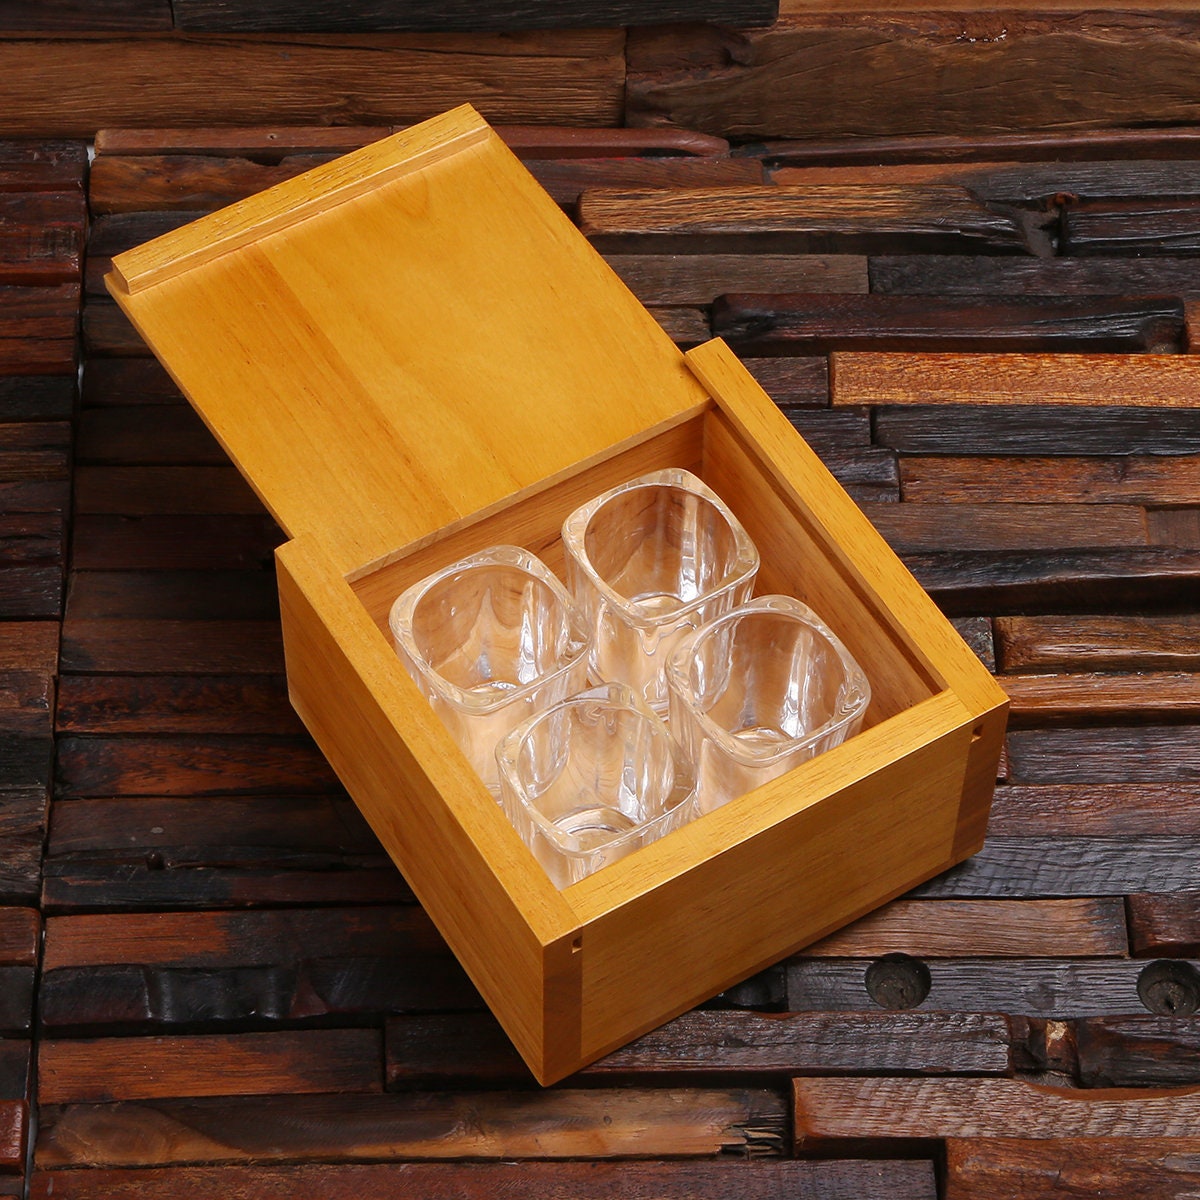 Shot Glass Set of 4 in Leather/Plaid Case